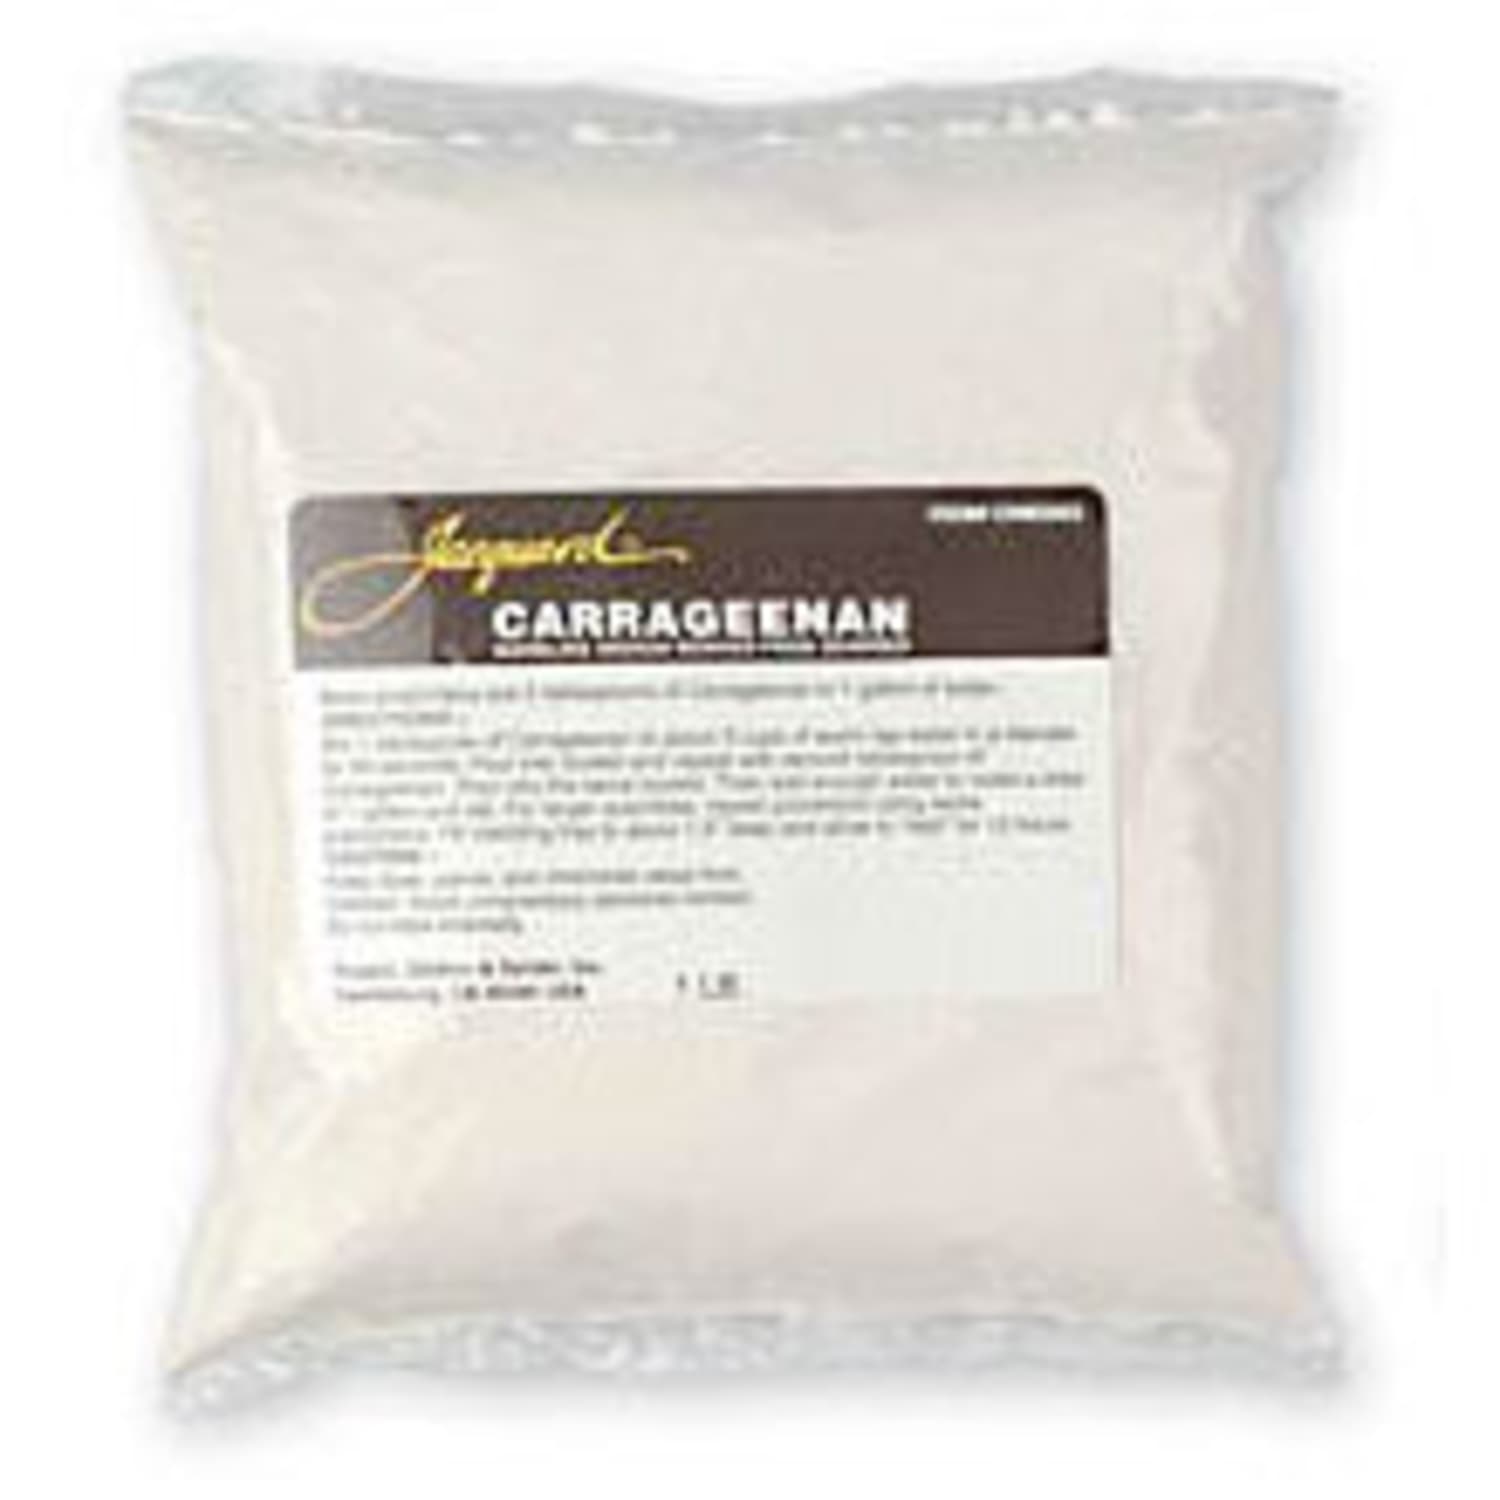 What is carrageenan?